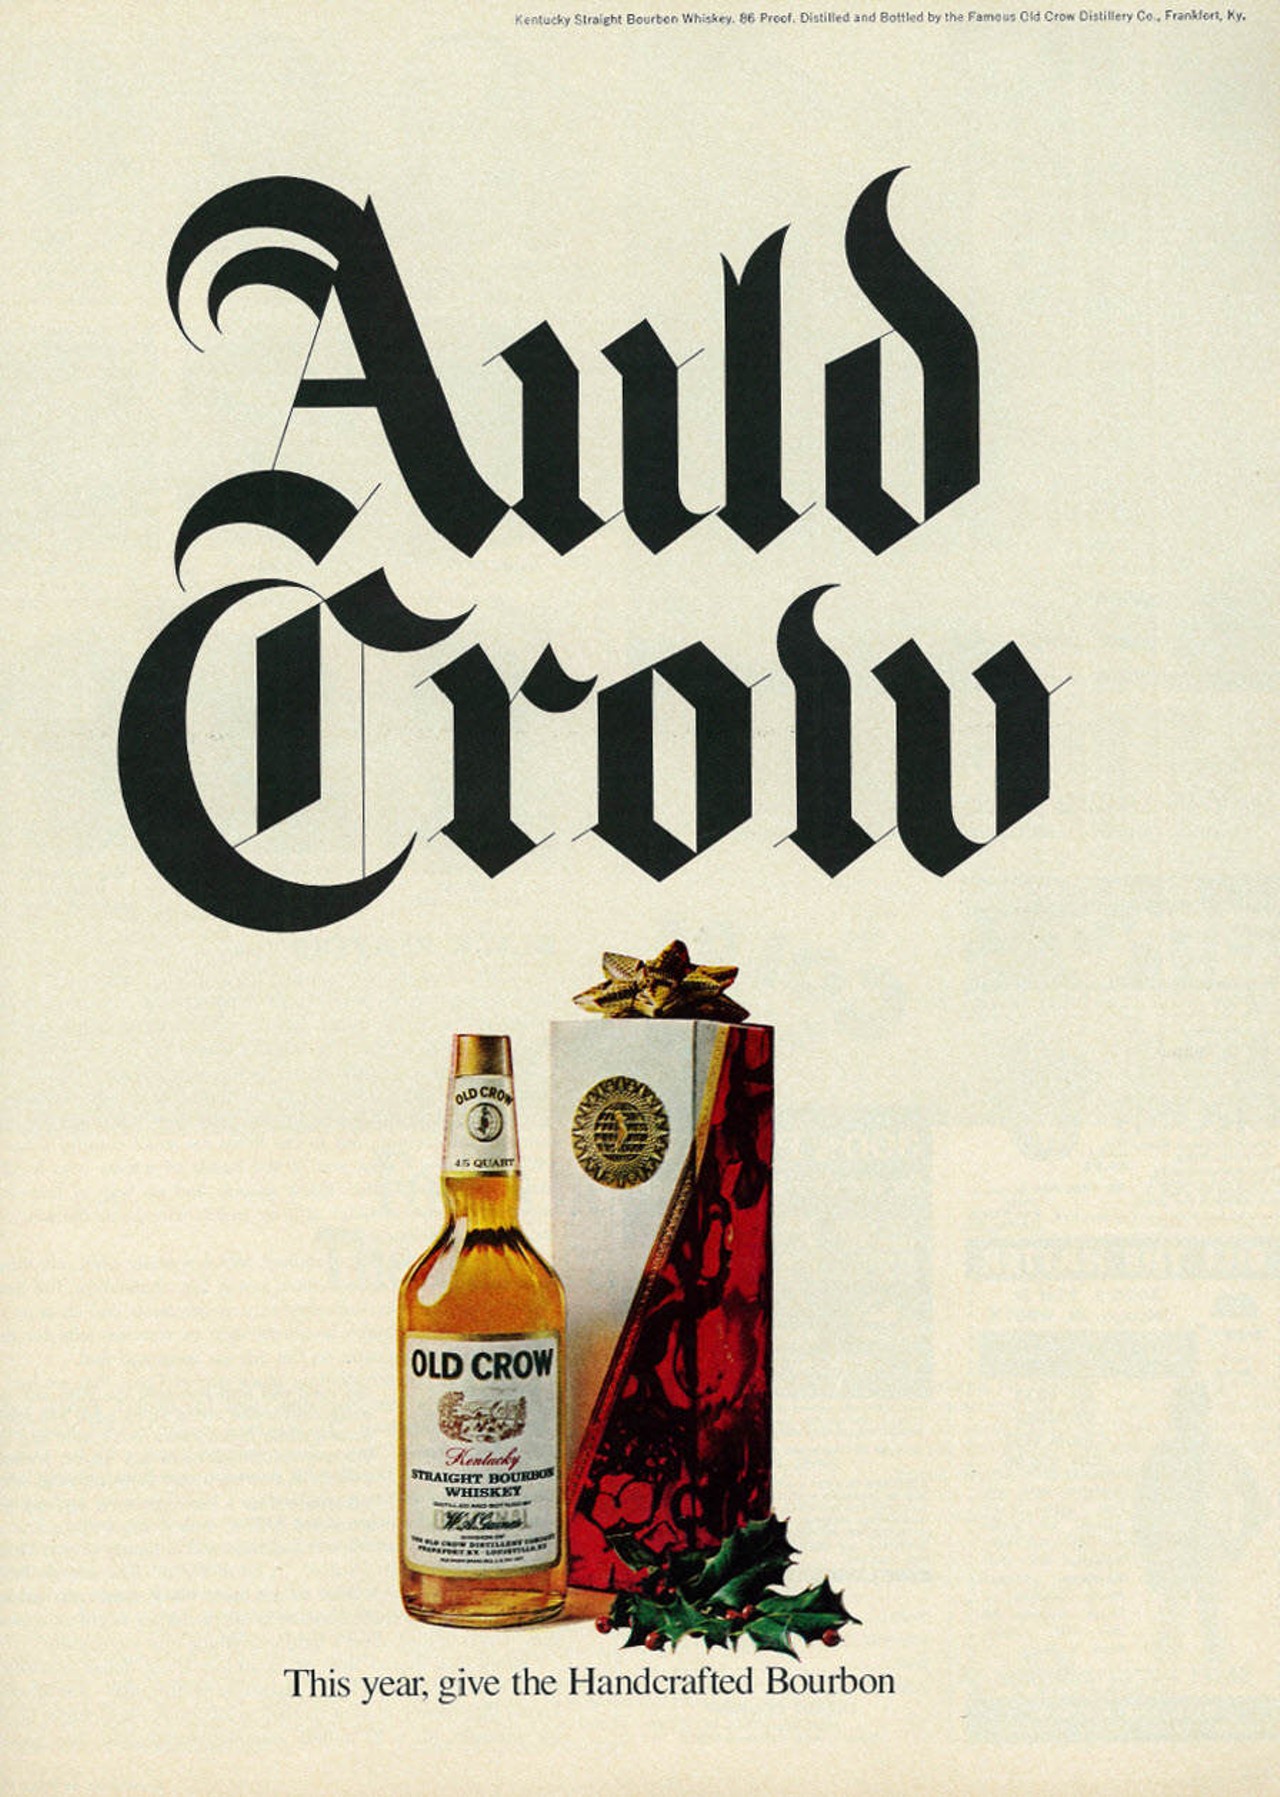 Old Crow Kentucky Straight Bourbon Whiskey, 1970 (Photo via Classic Film, Flickr Creative Commons)